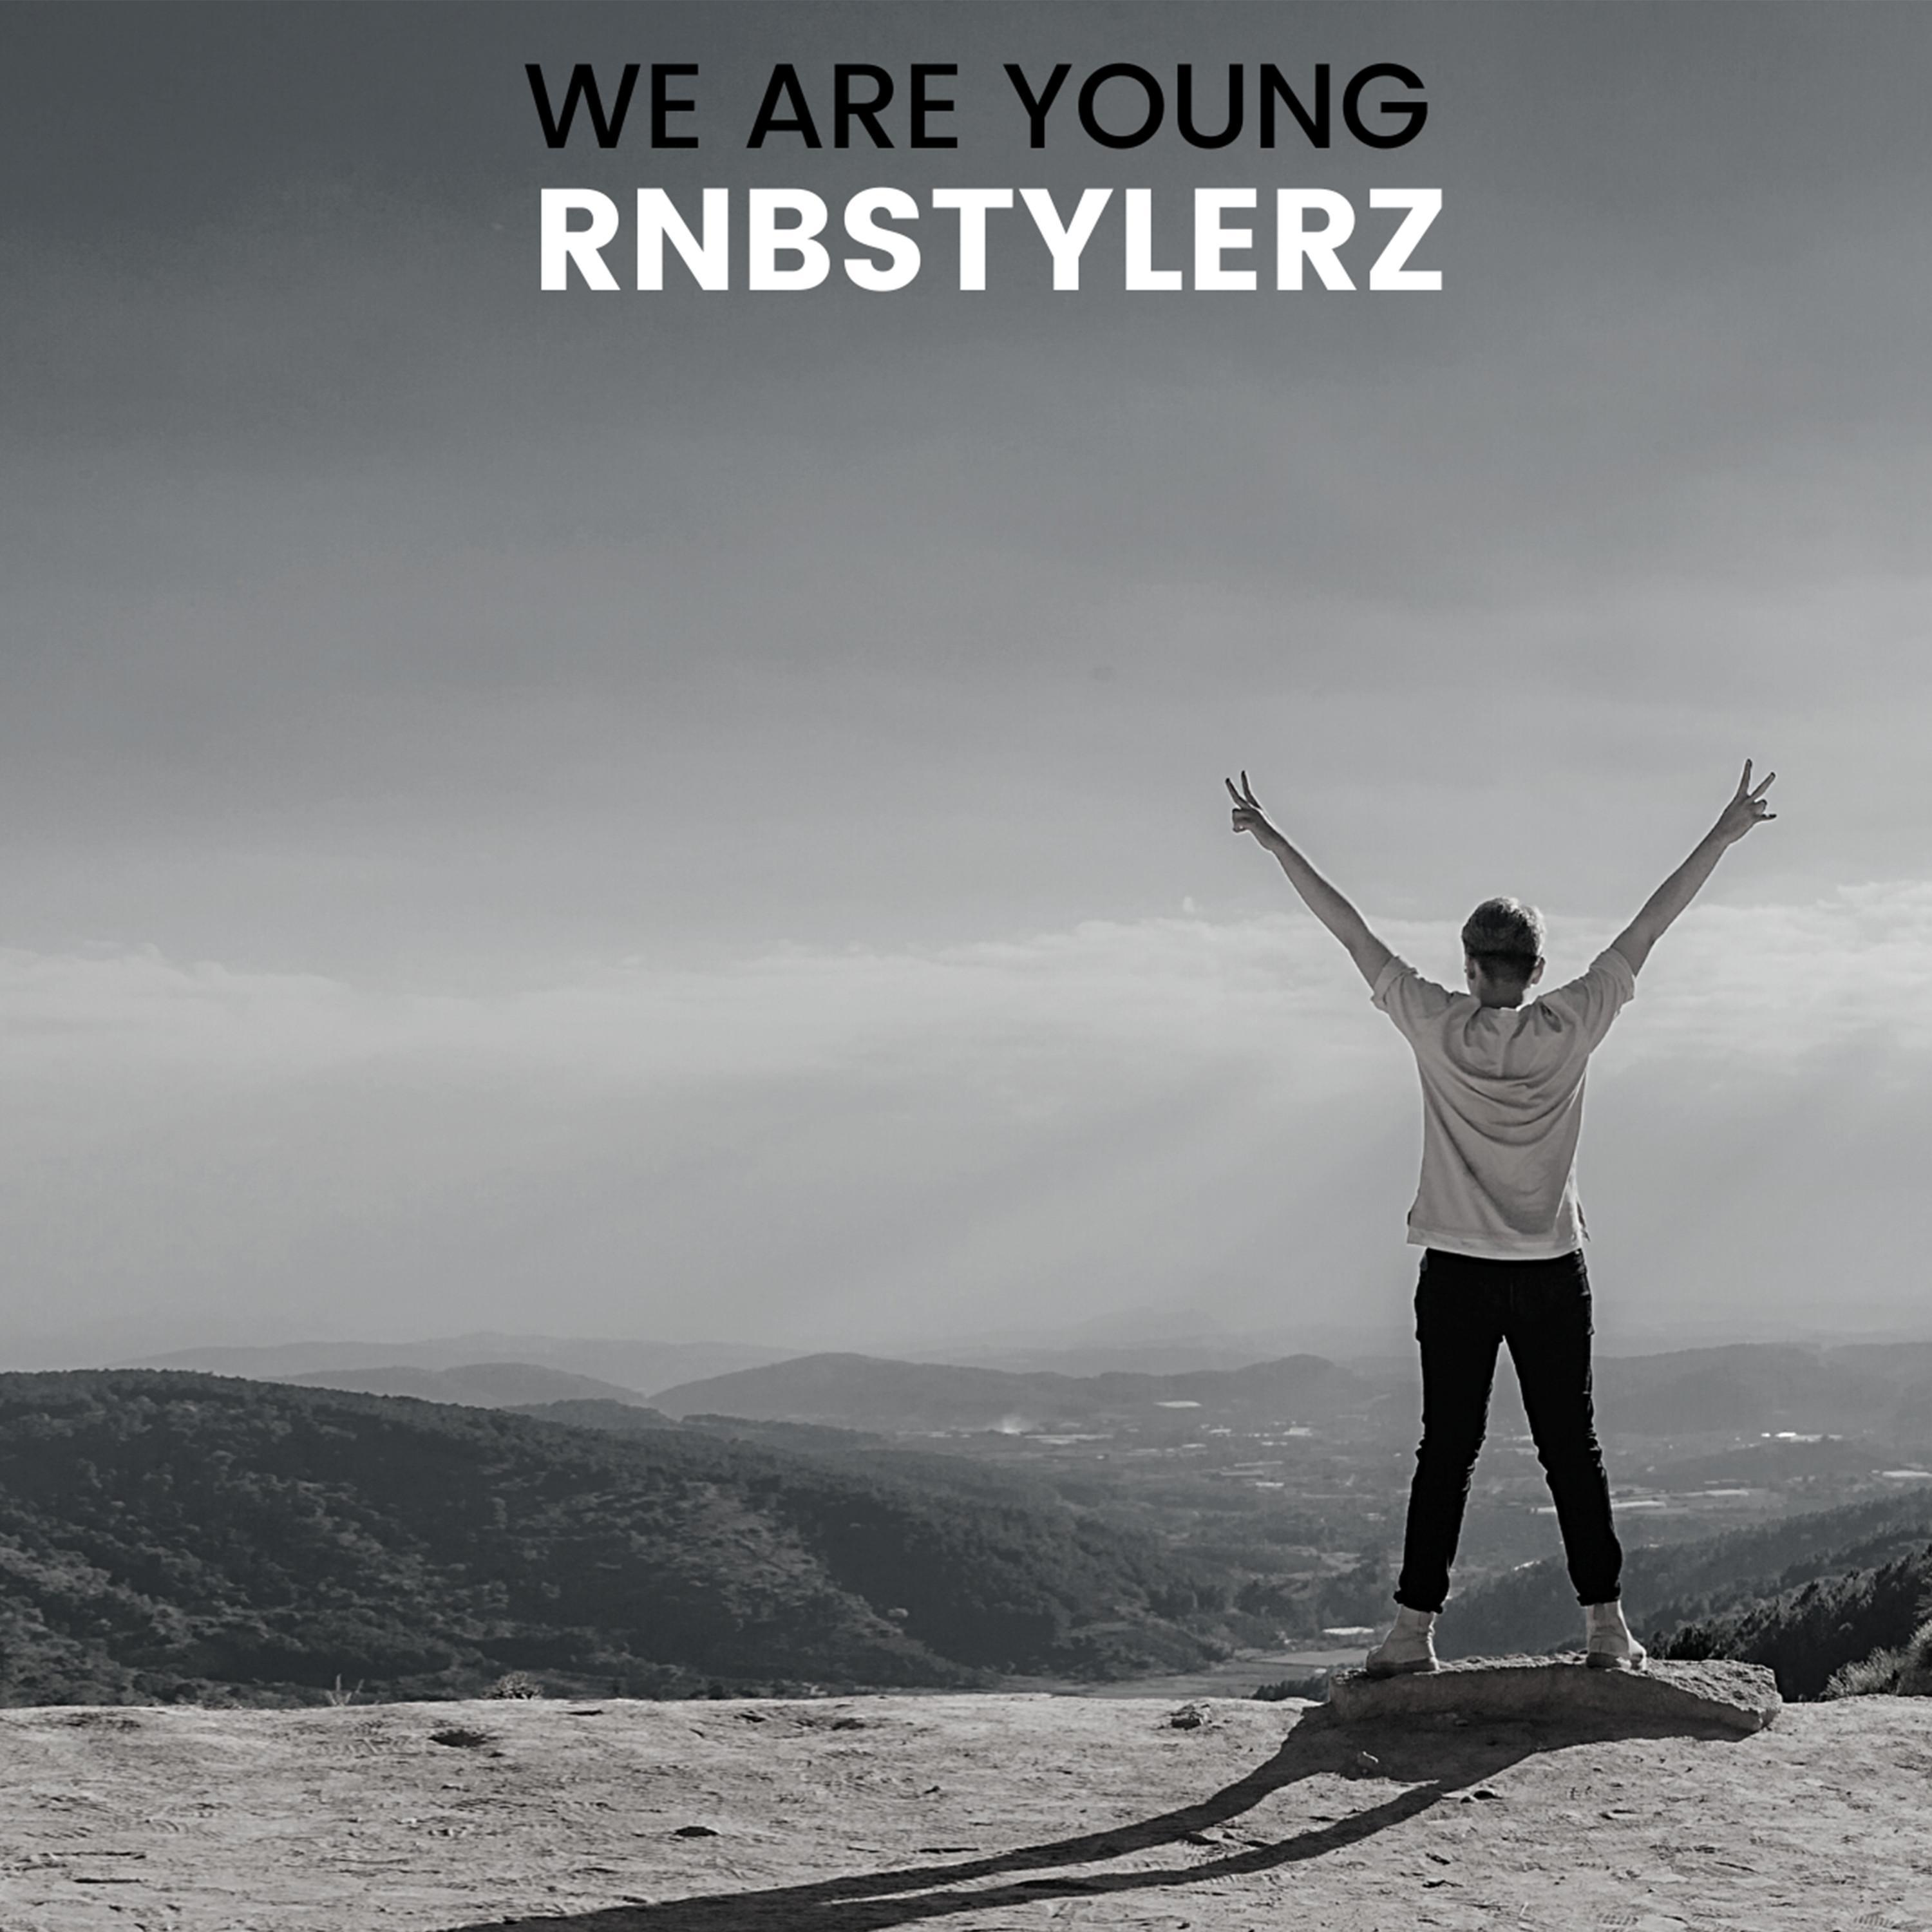 Rnbstylerz - We Are Young